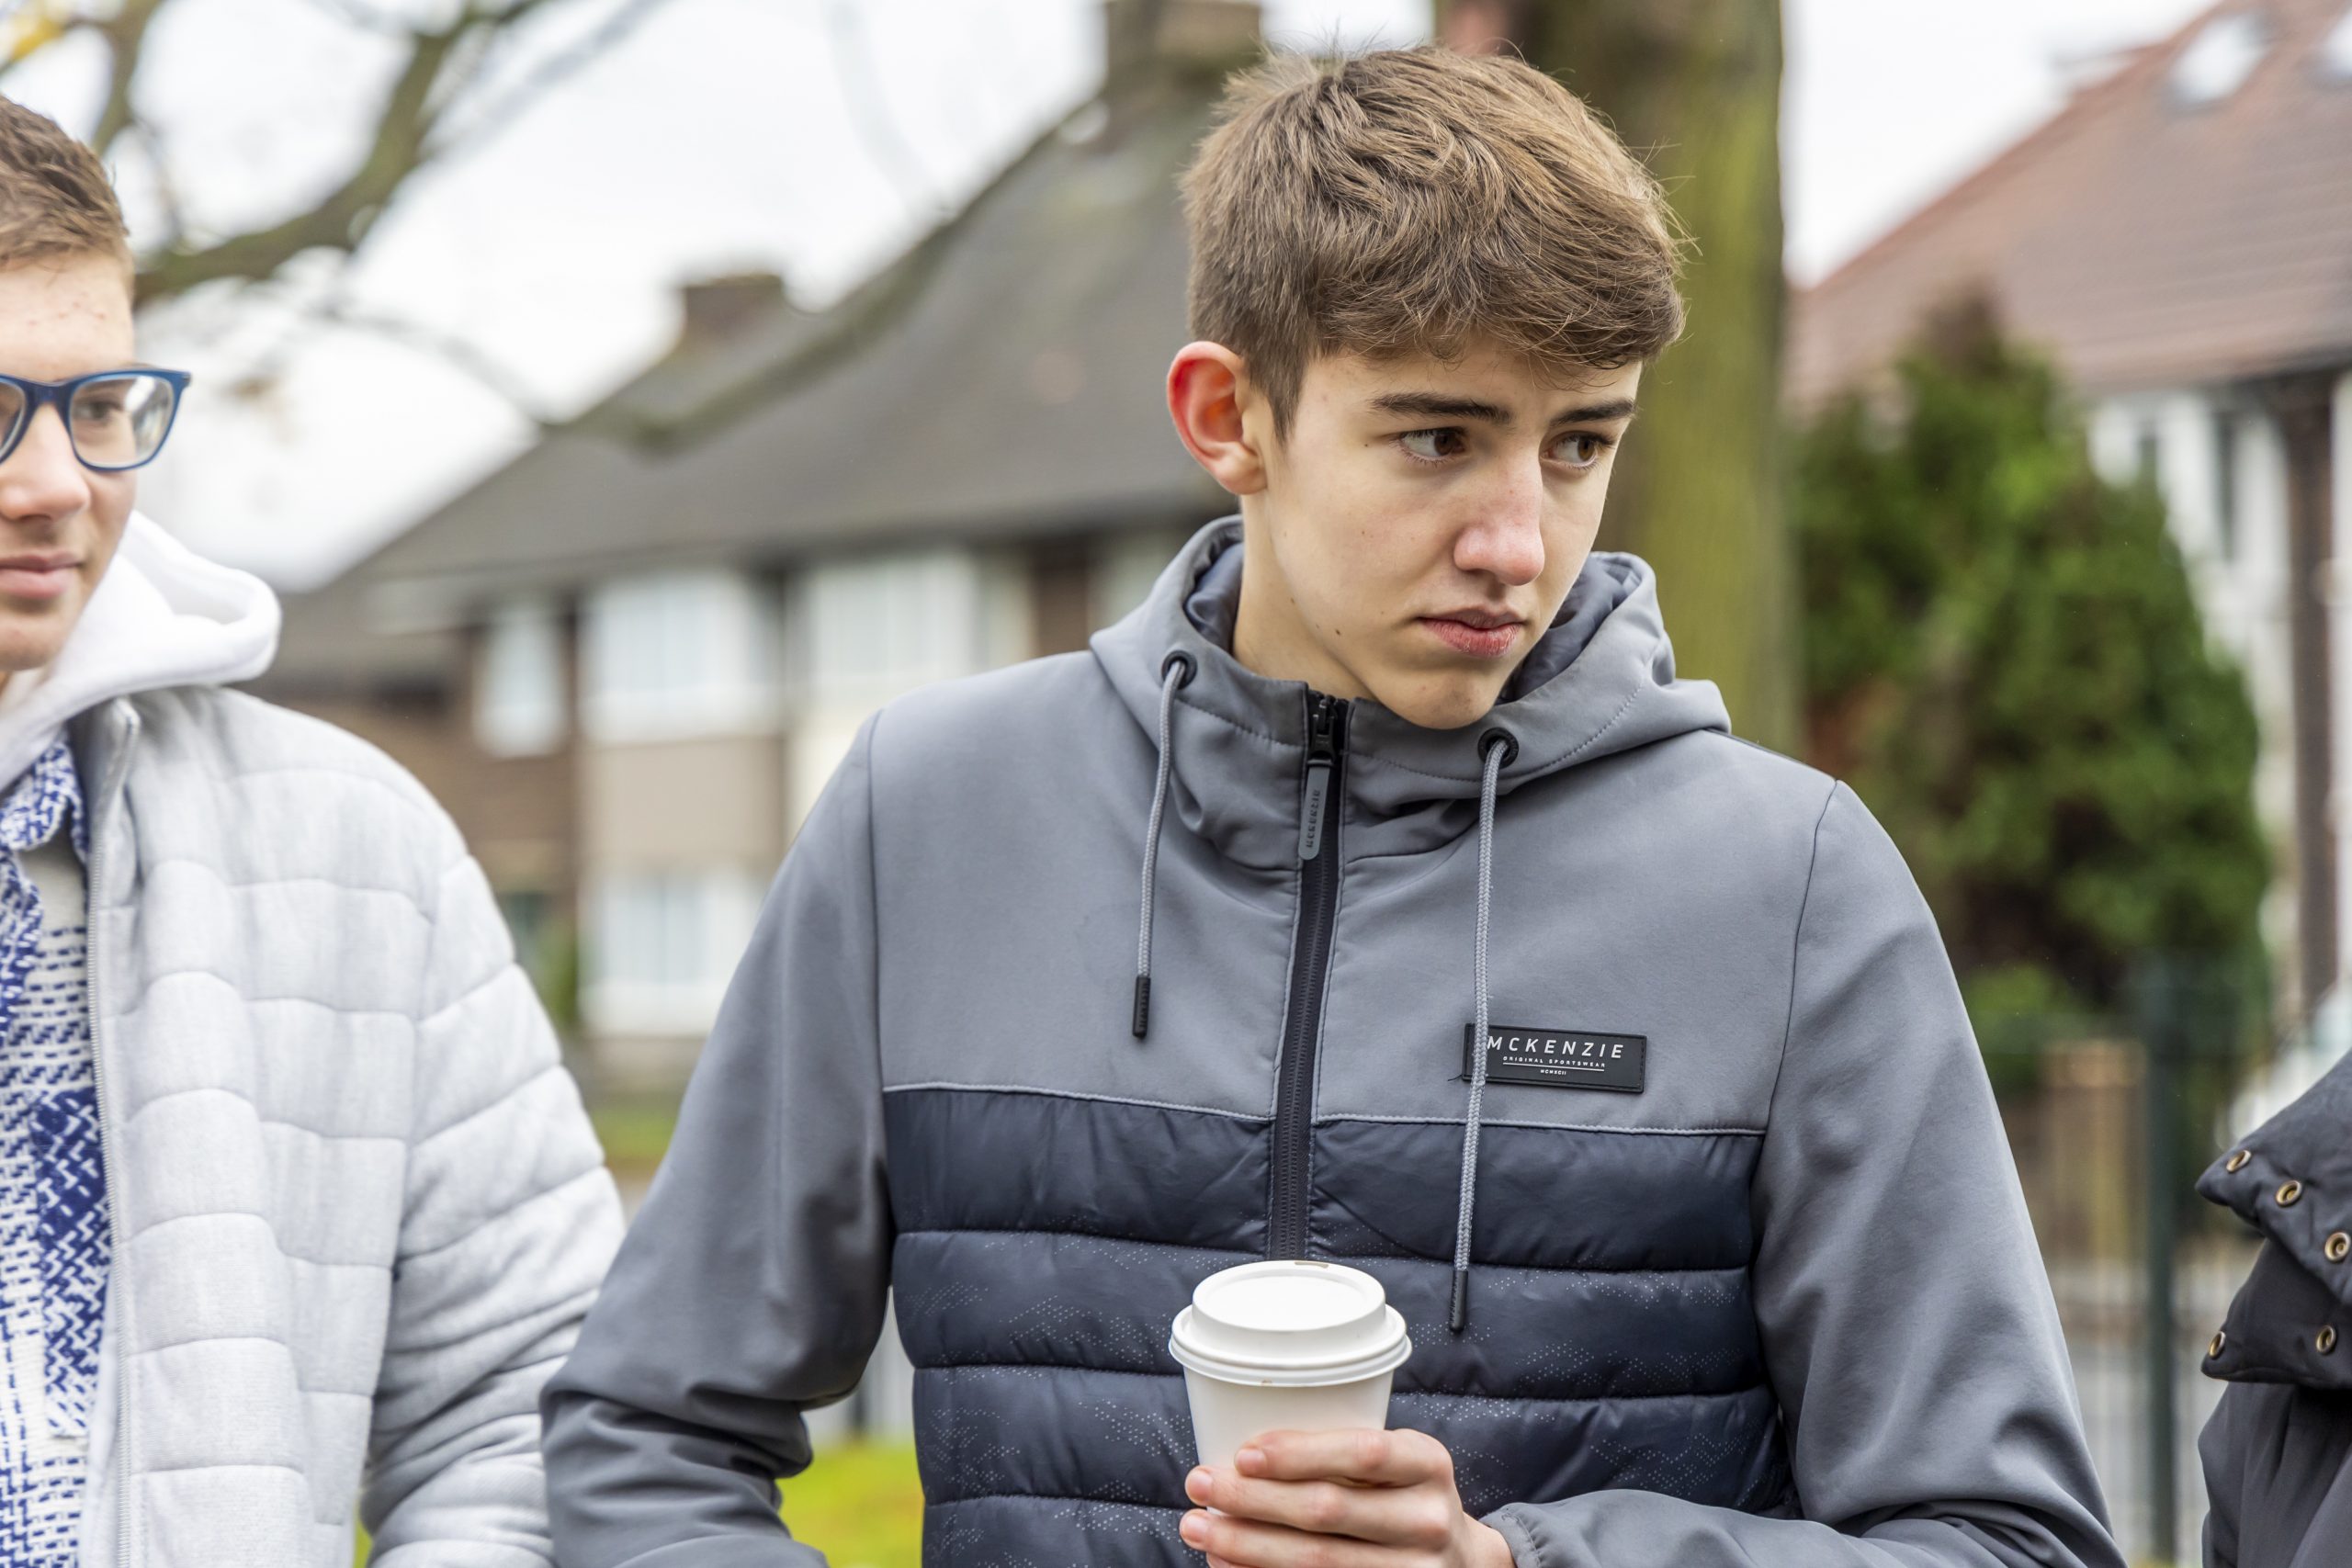 A young person is standing in the street wearing a grey jacket and holding a coffee cup. They are with friends talking about Housing Benefit.